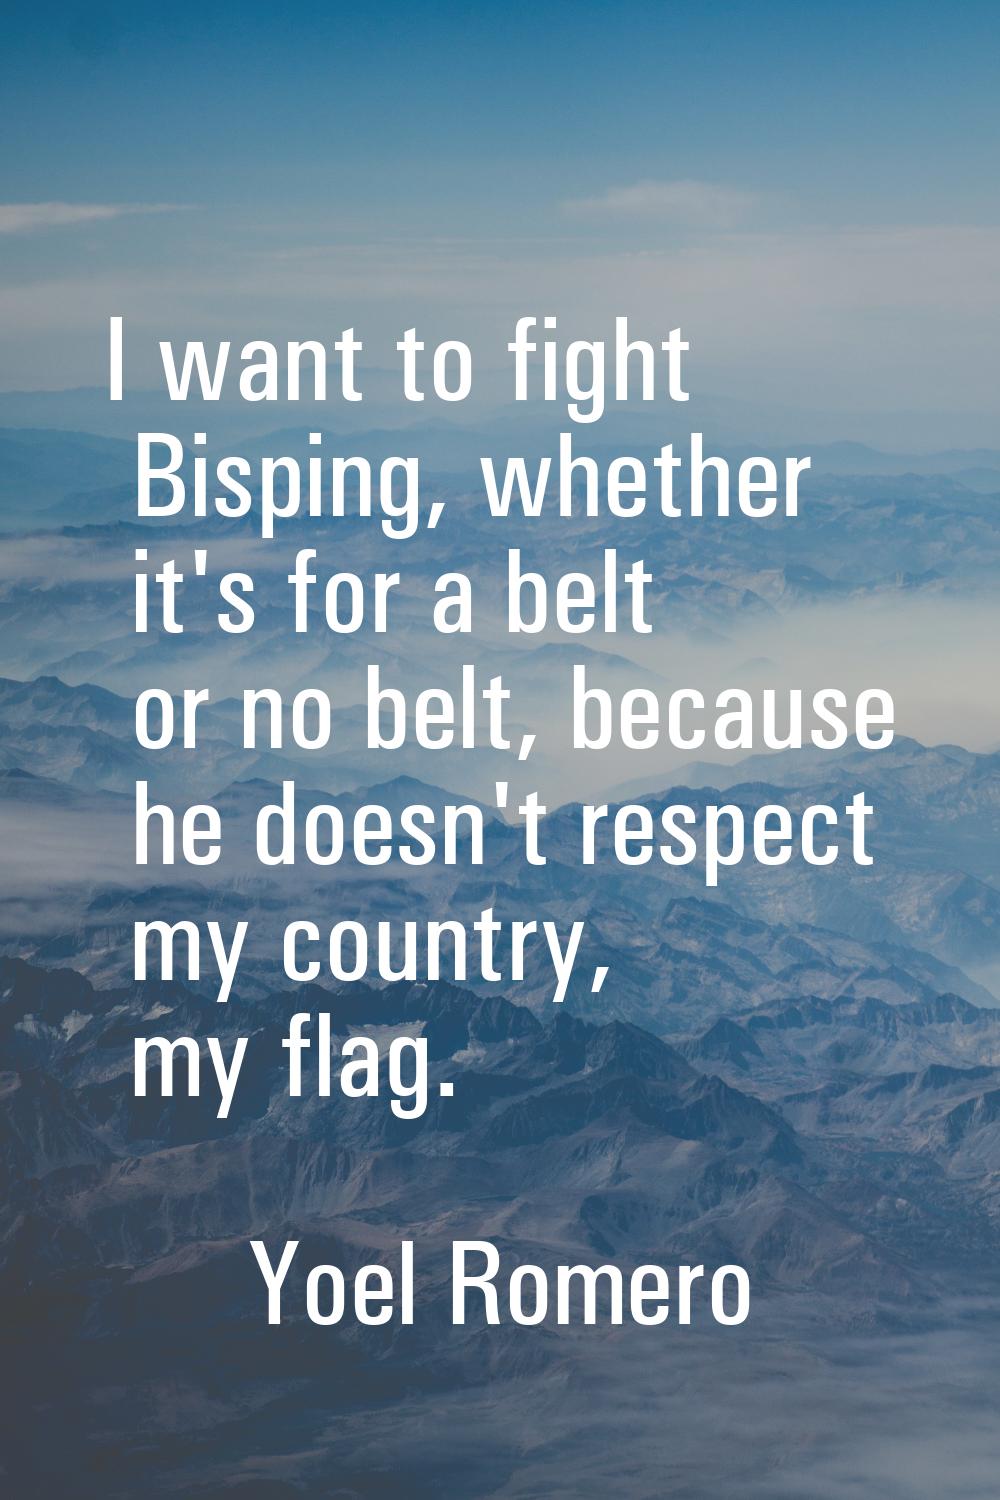 I want to fight Bisping, whether it's for a belt or no belt, because he doesn't respect my country,